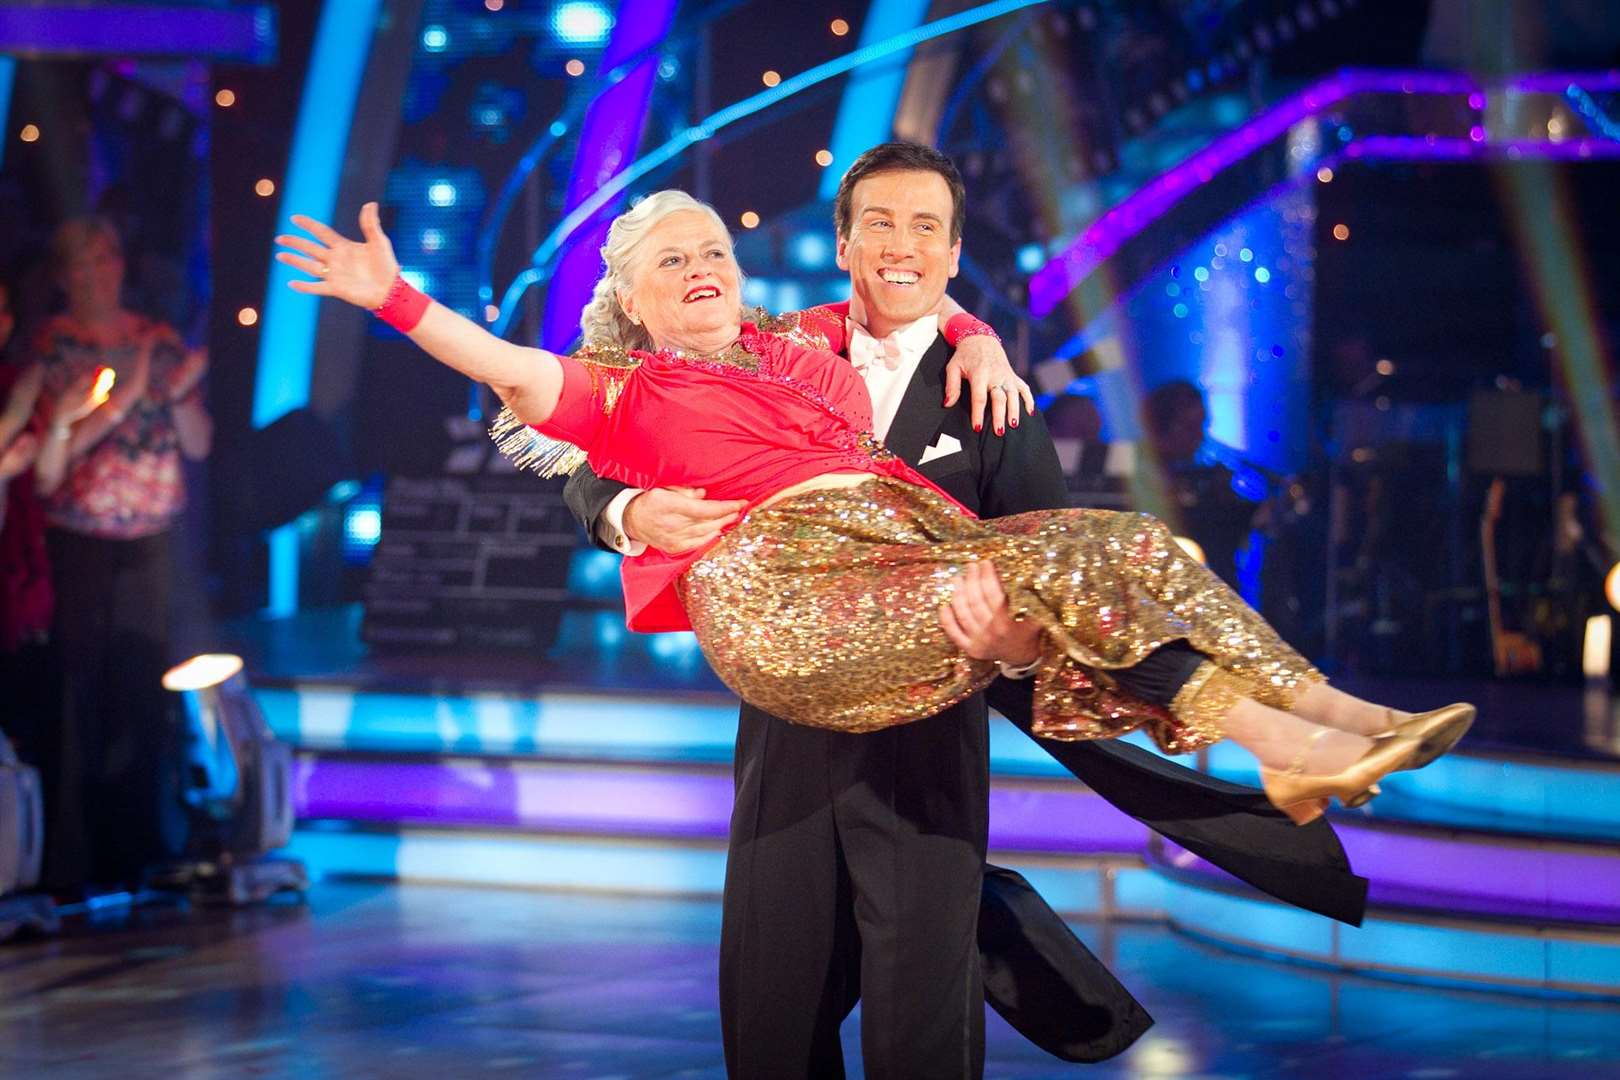 Ann Widdecombe was paired up with Anton Du Beck the last time she appeared on the show